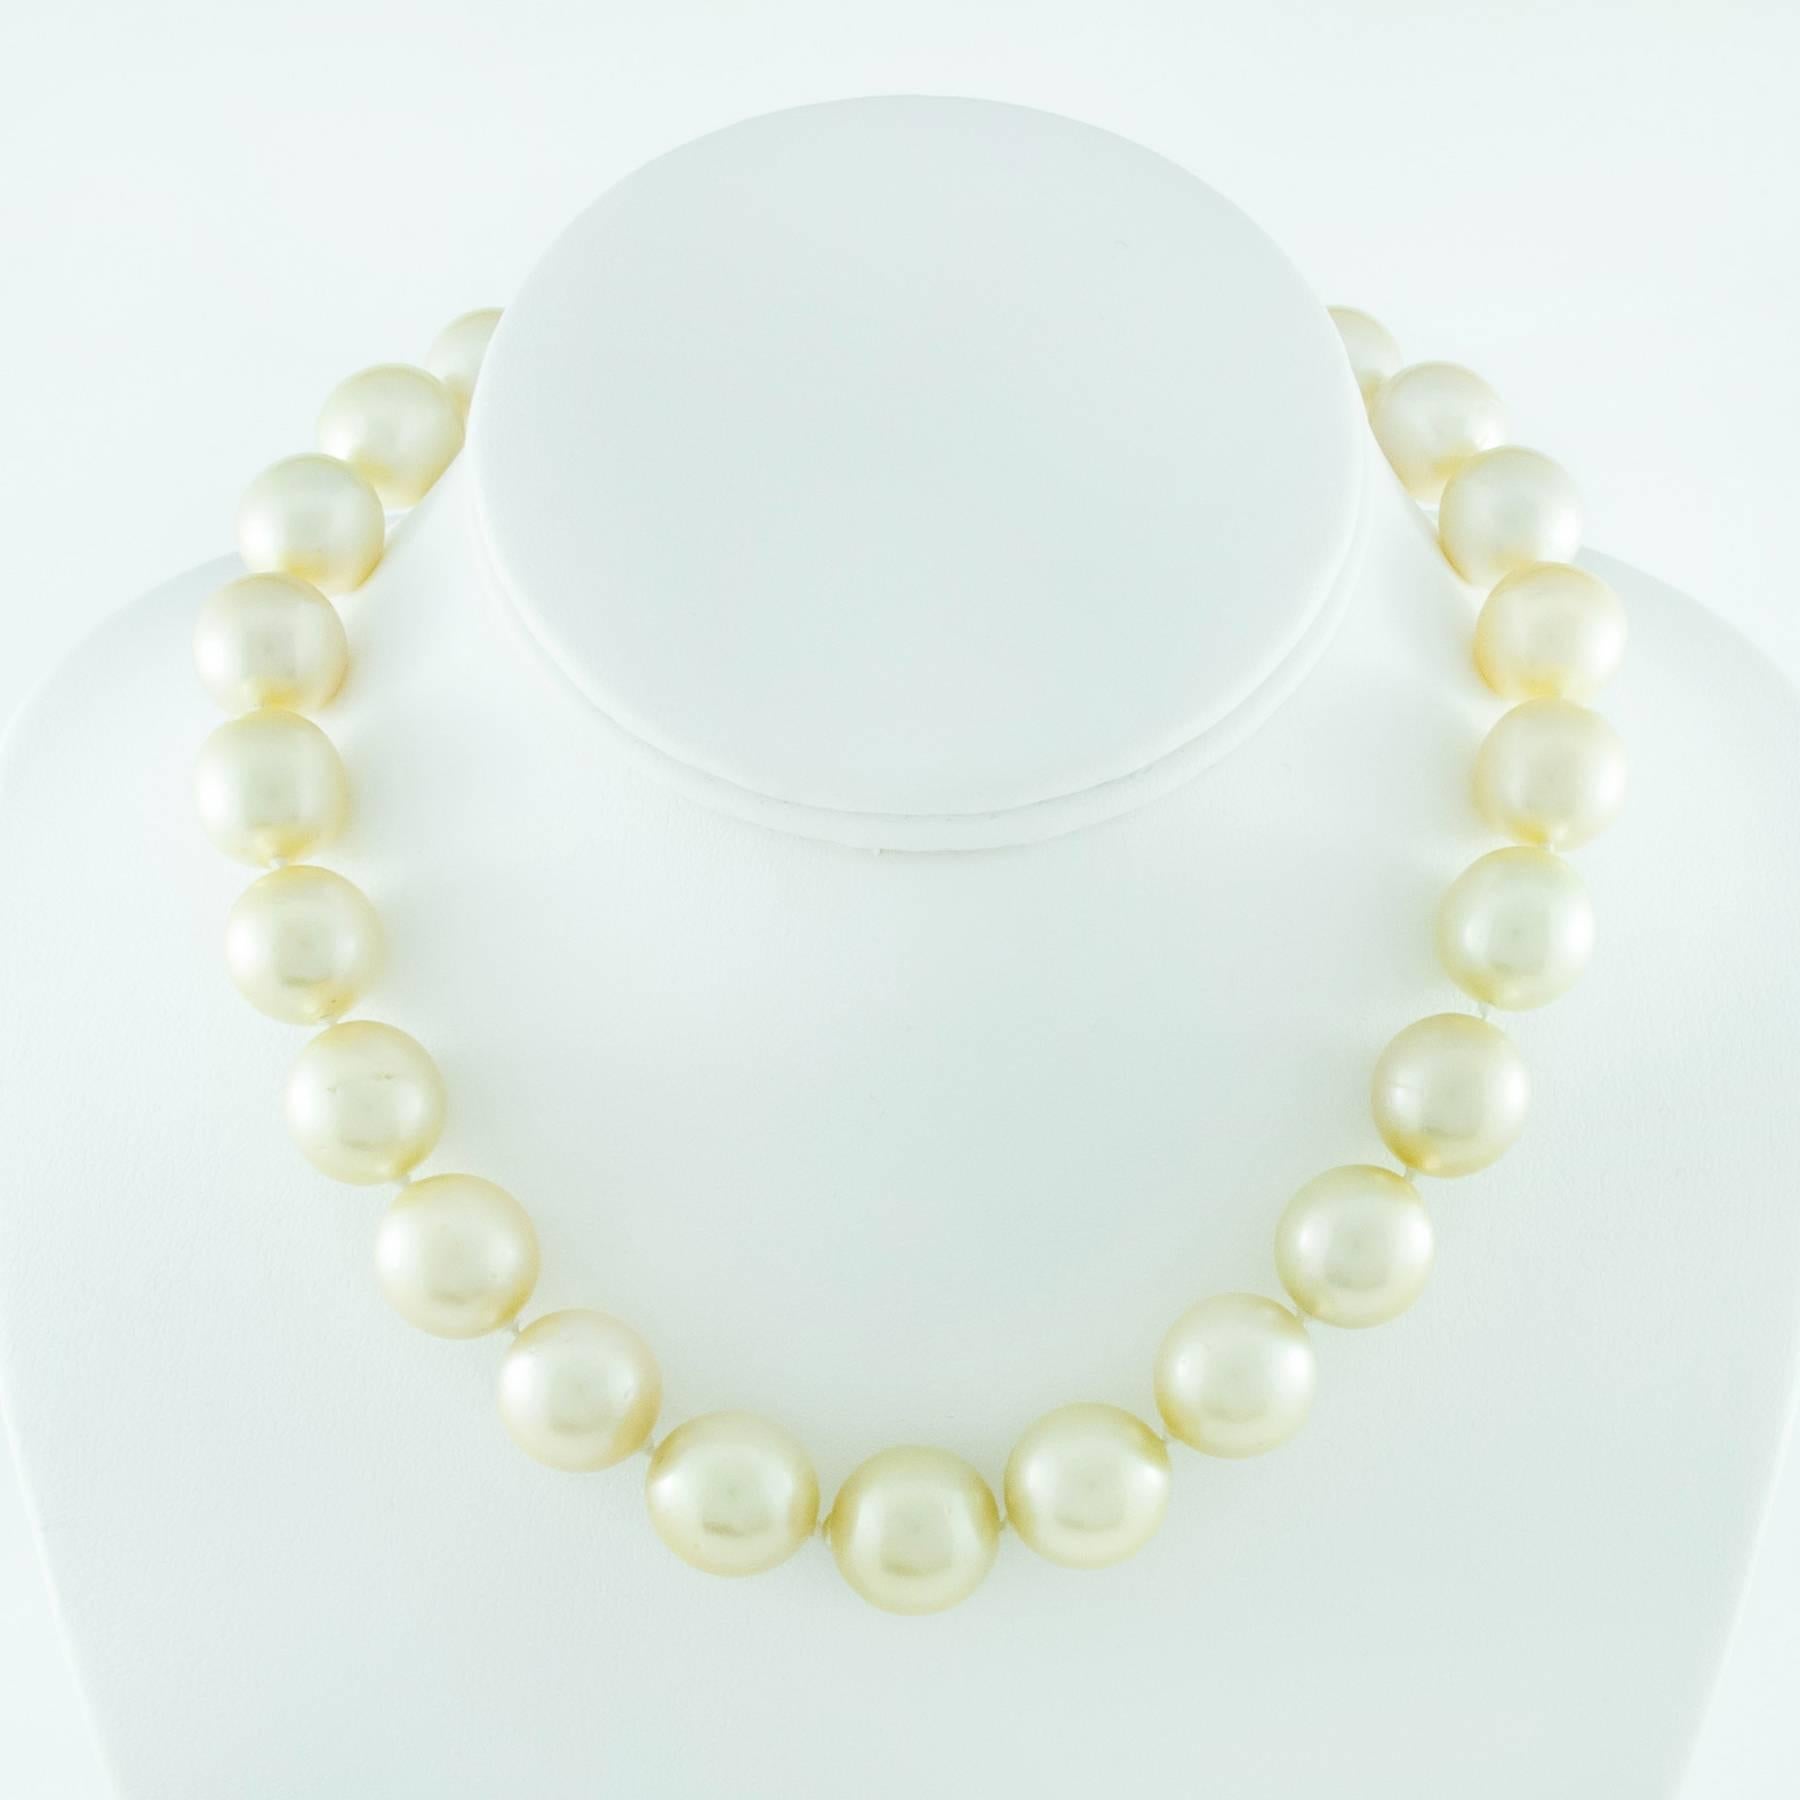 There are 25 Champagne 13-13.5mm South Seas Pearls in this necklace, which features a beautiful 18K yellow gold decorative tongue and groove closure.

The wearable length of this strand is 16 inches long. The Champagne Pearls are well matched with